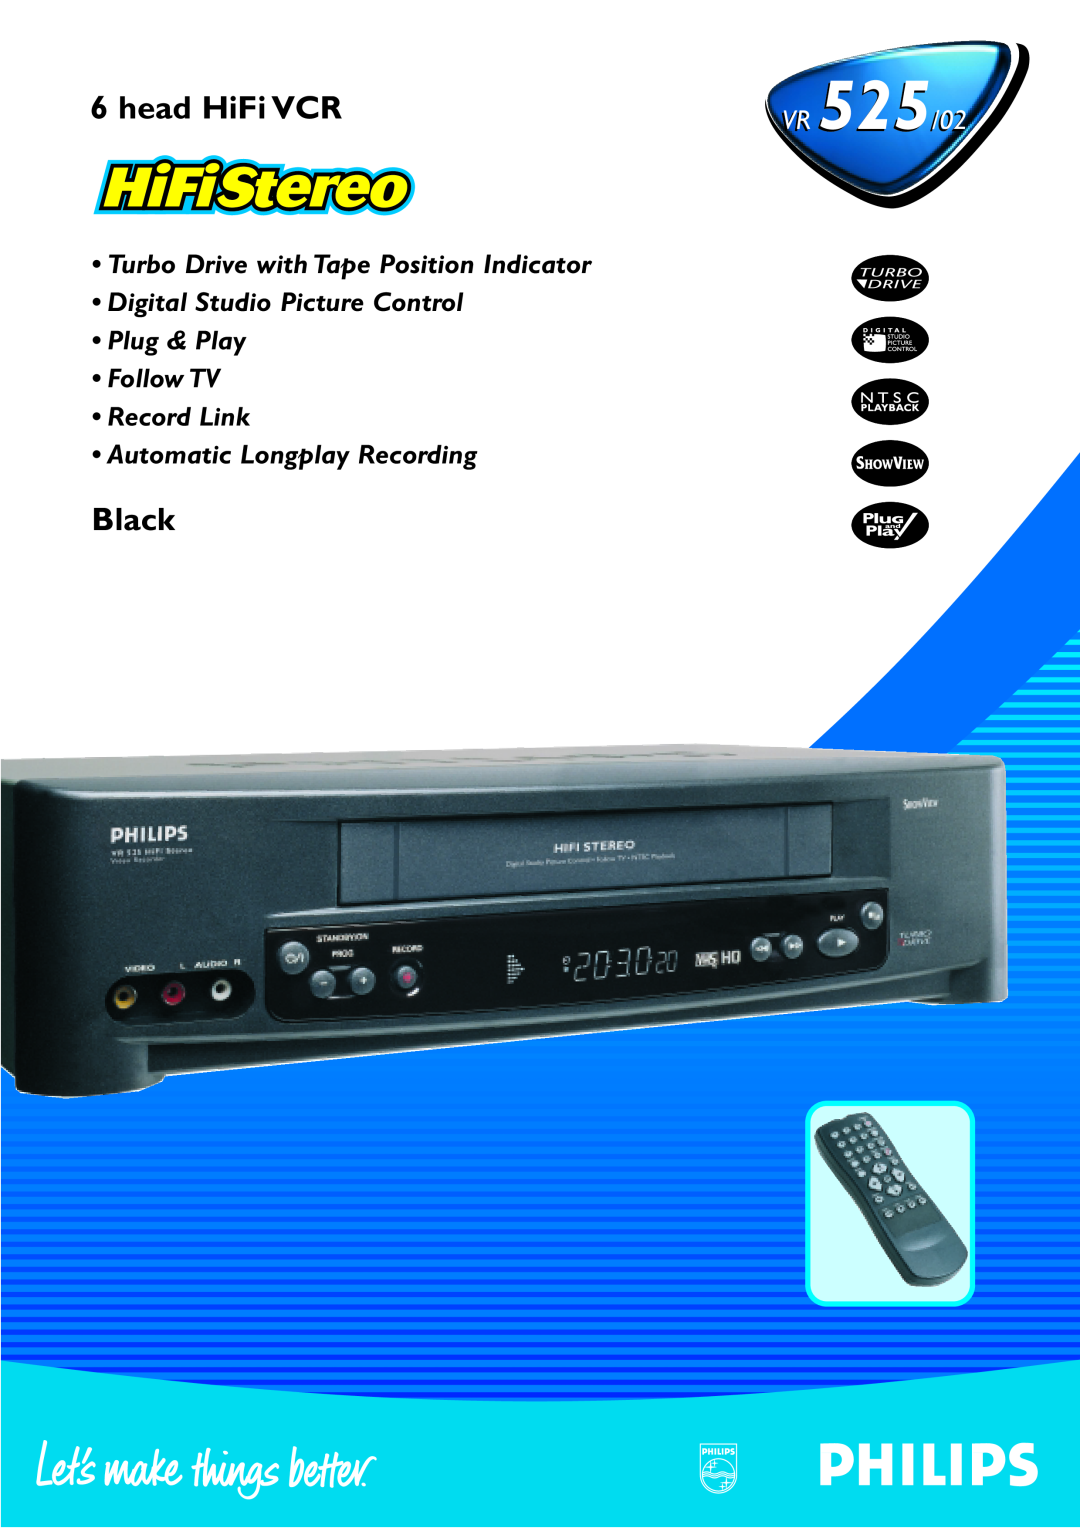 Philips VR 525/02 manual Black, head HiFi VCR, Turbo Drive with Tape Position Indicator, Automatic Longplay Recording 